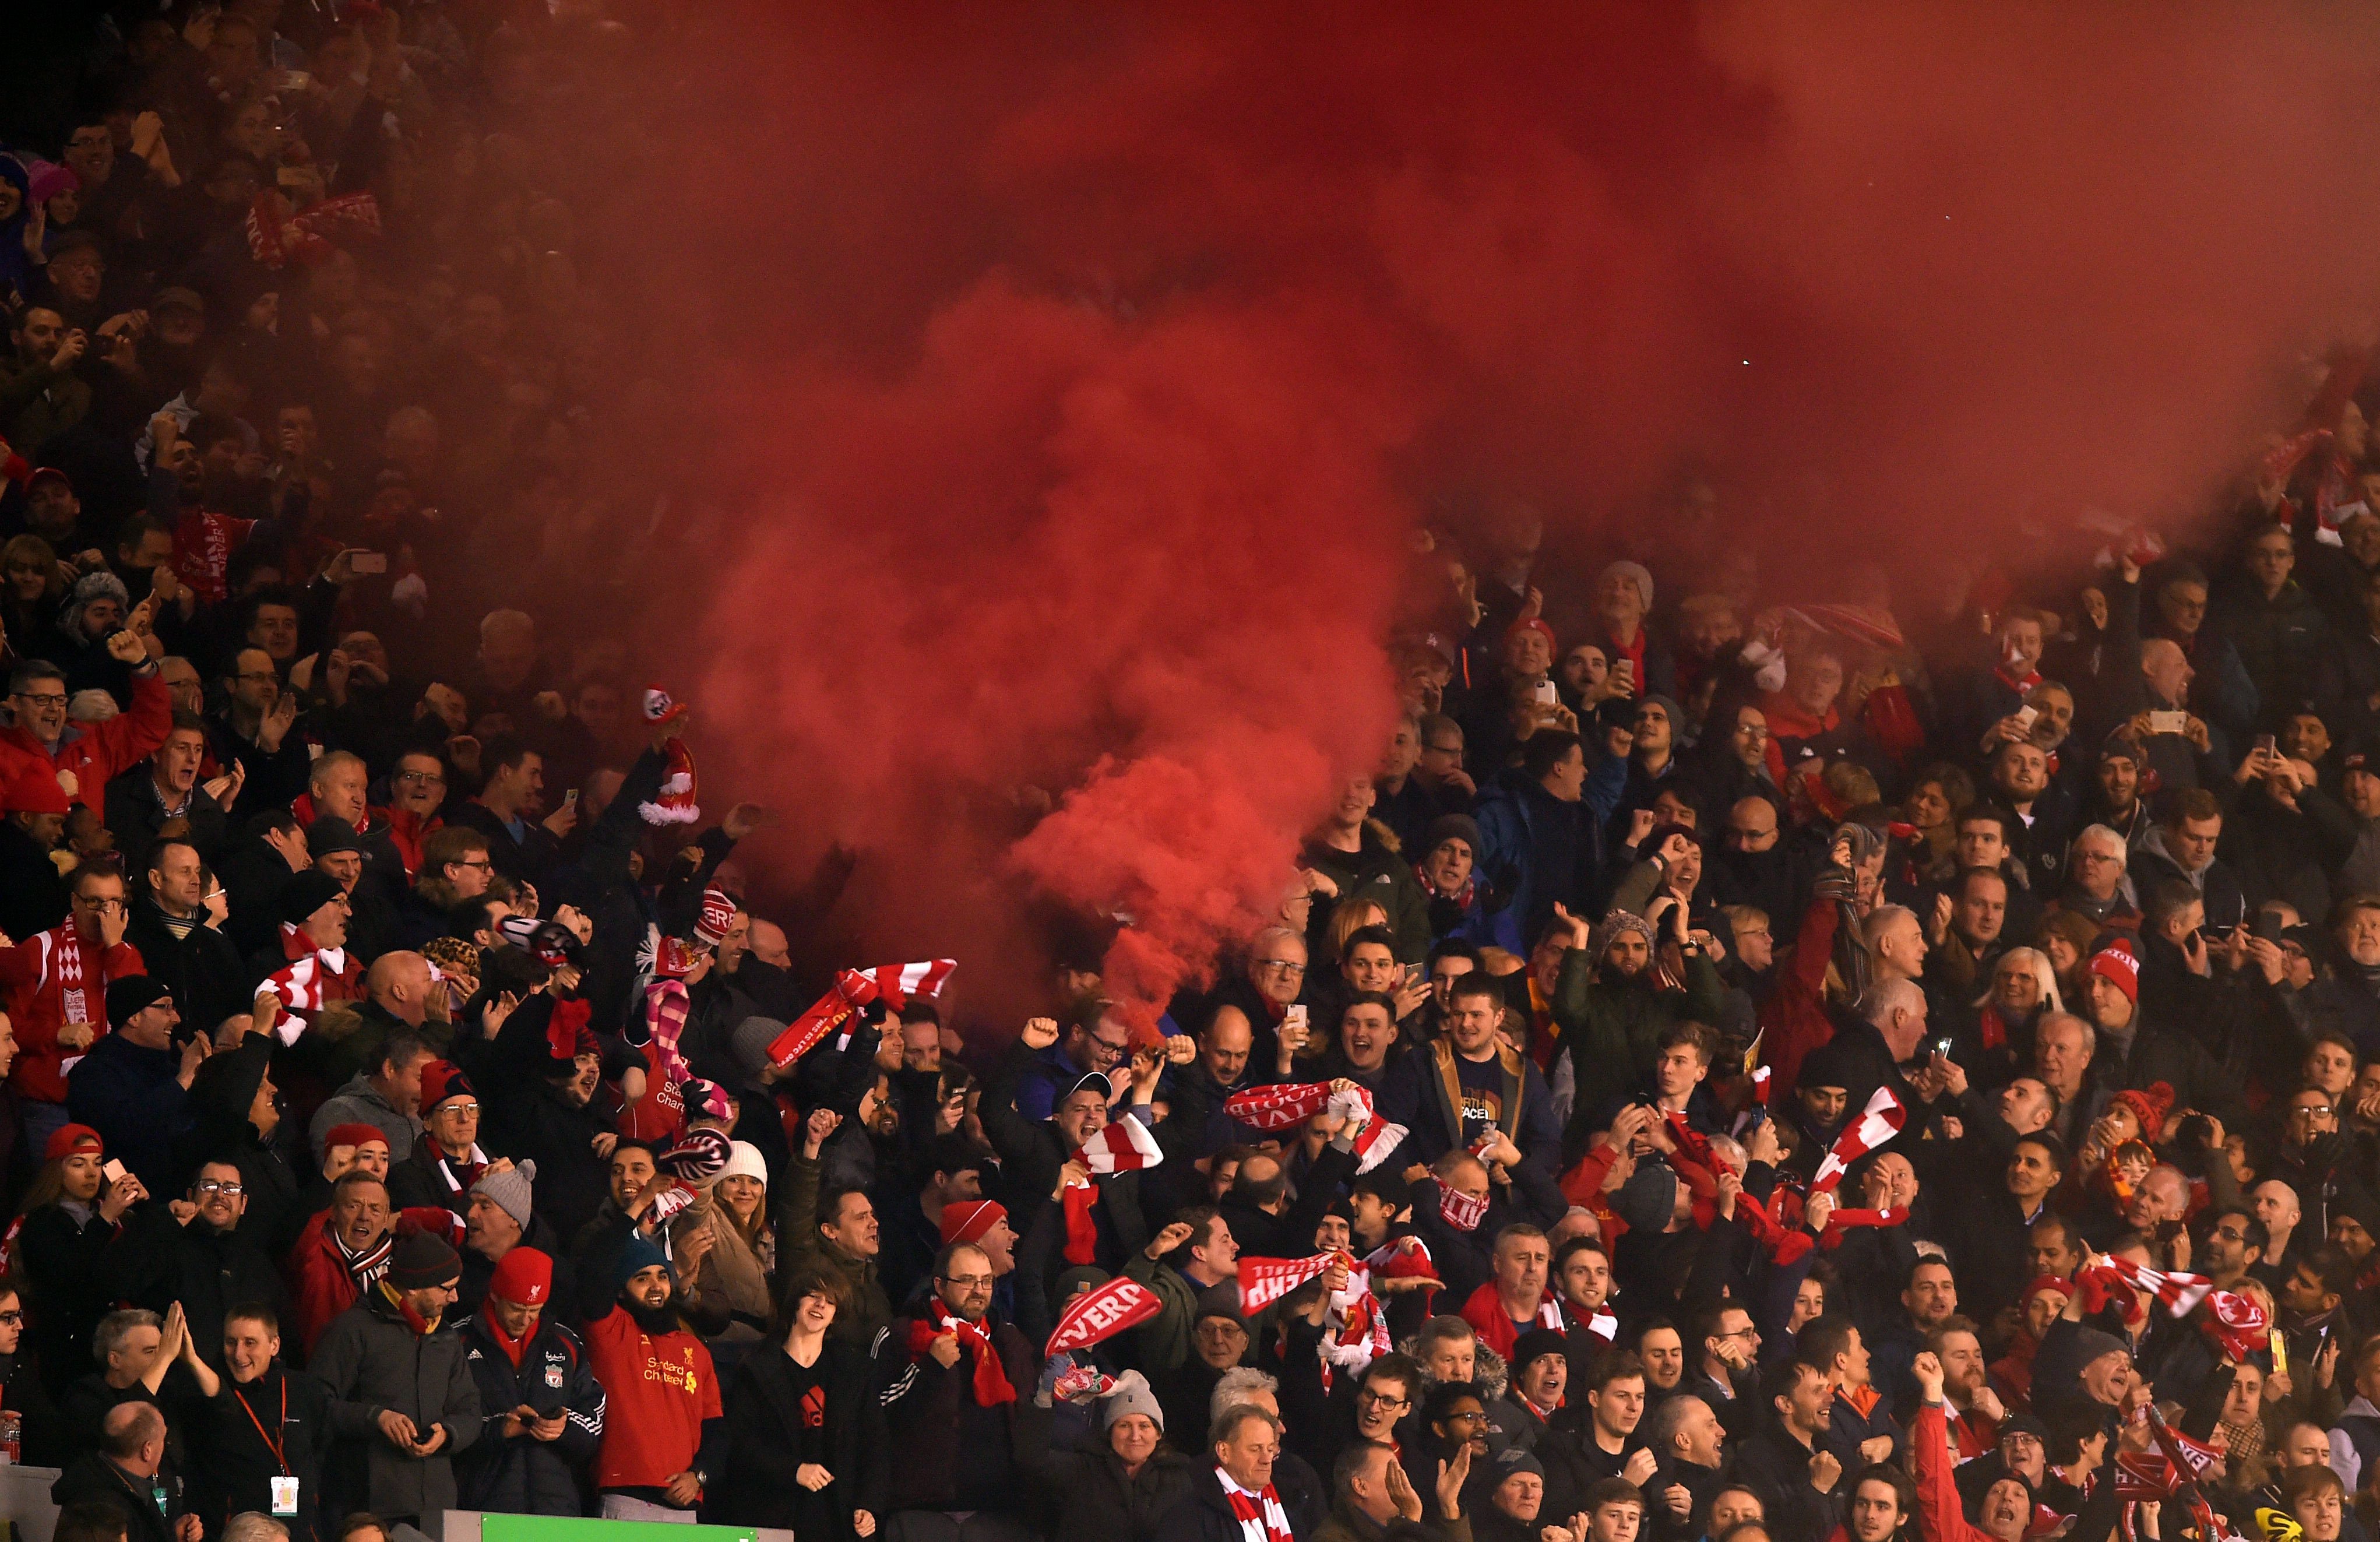 epa05205273 Red smoke rises from the main stand after Liverpool scored the 2-0 during the UEFA Europa League round of 16 soccer match between Liverpool and Manchester United at Anfield in Liverpool, Britain, 10 March 2016.  EPA/PETER POWELL